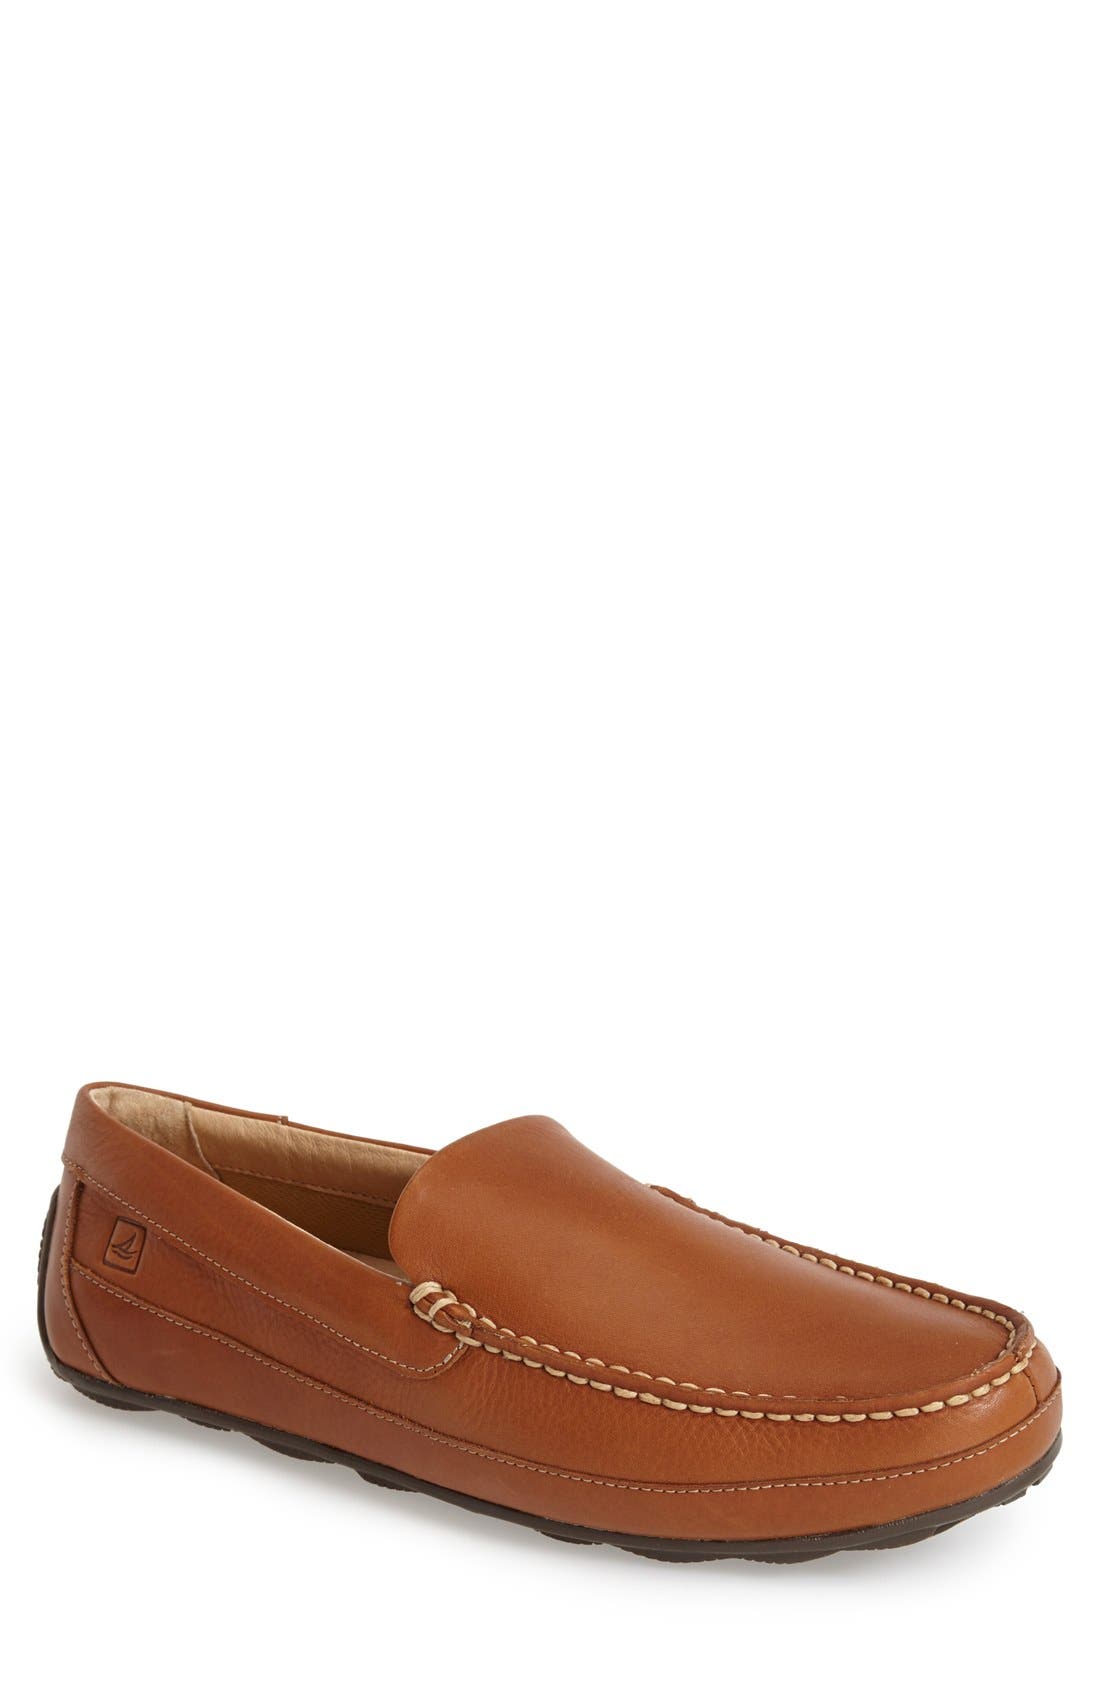 sperry gold cup nordstrom rack